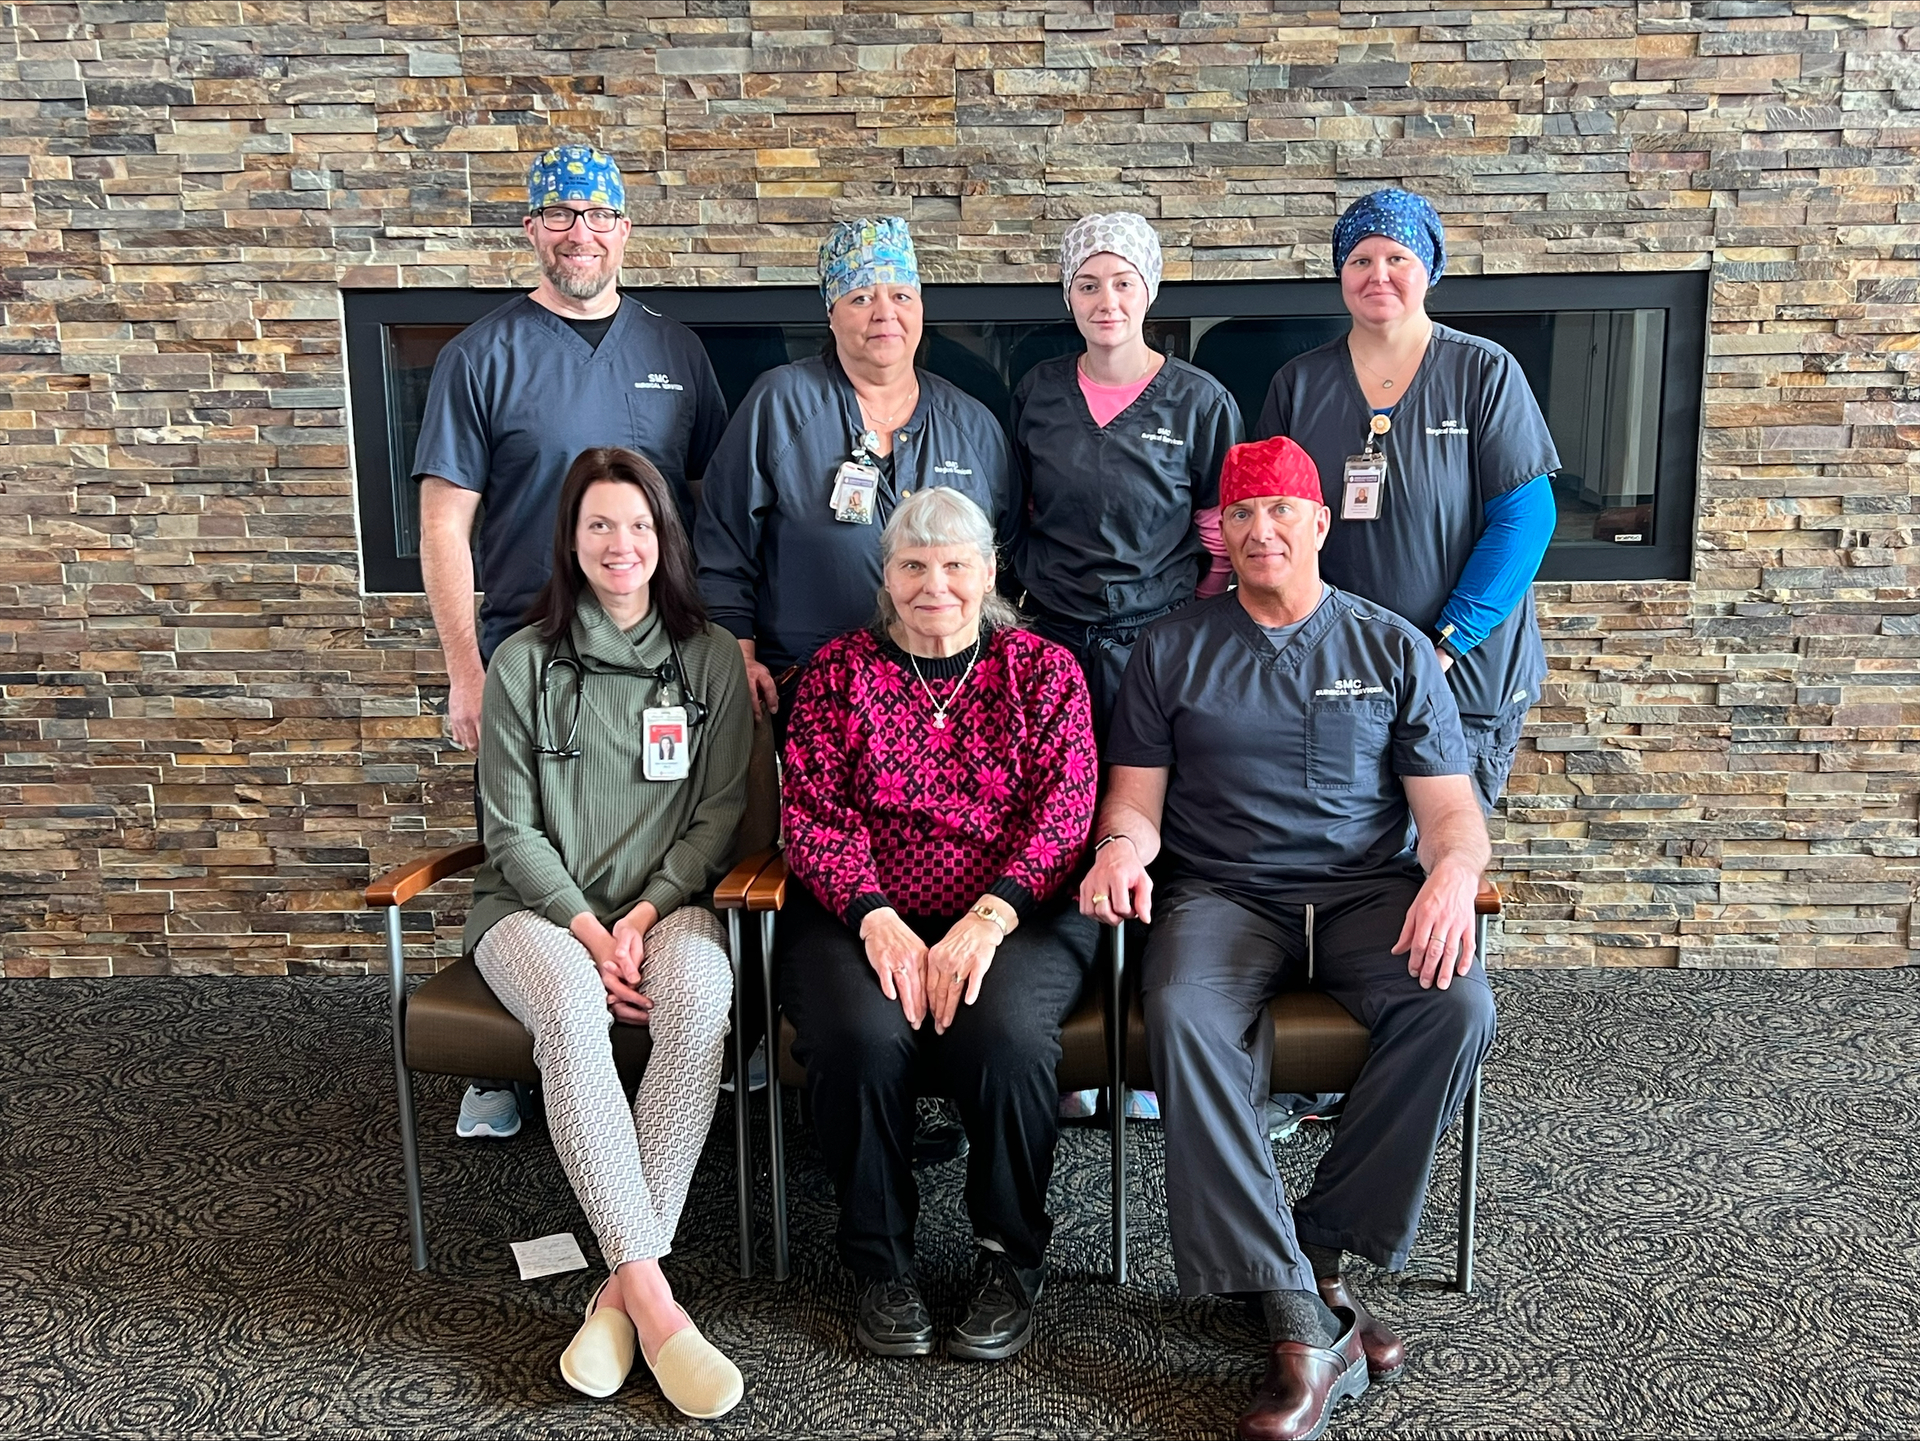 Pictured (front row left to right): Keri Baumberger, PA-C at CCCHC; Sarah Richau; and Dr. Michael L. Schmit, SMC Staff Surgeon. Back row left to right: Carl Miller, CRNA; Janel Roshau, LPN; Olivia Weisz, CST; and Destiny Chapman, RN/Operating Room Coordinator